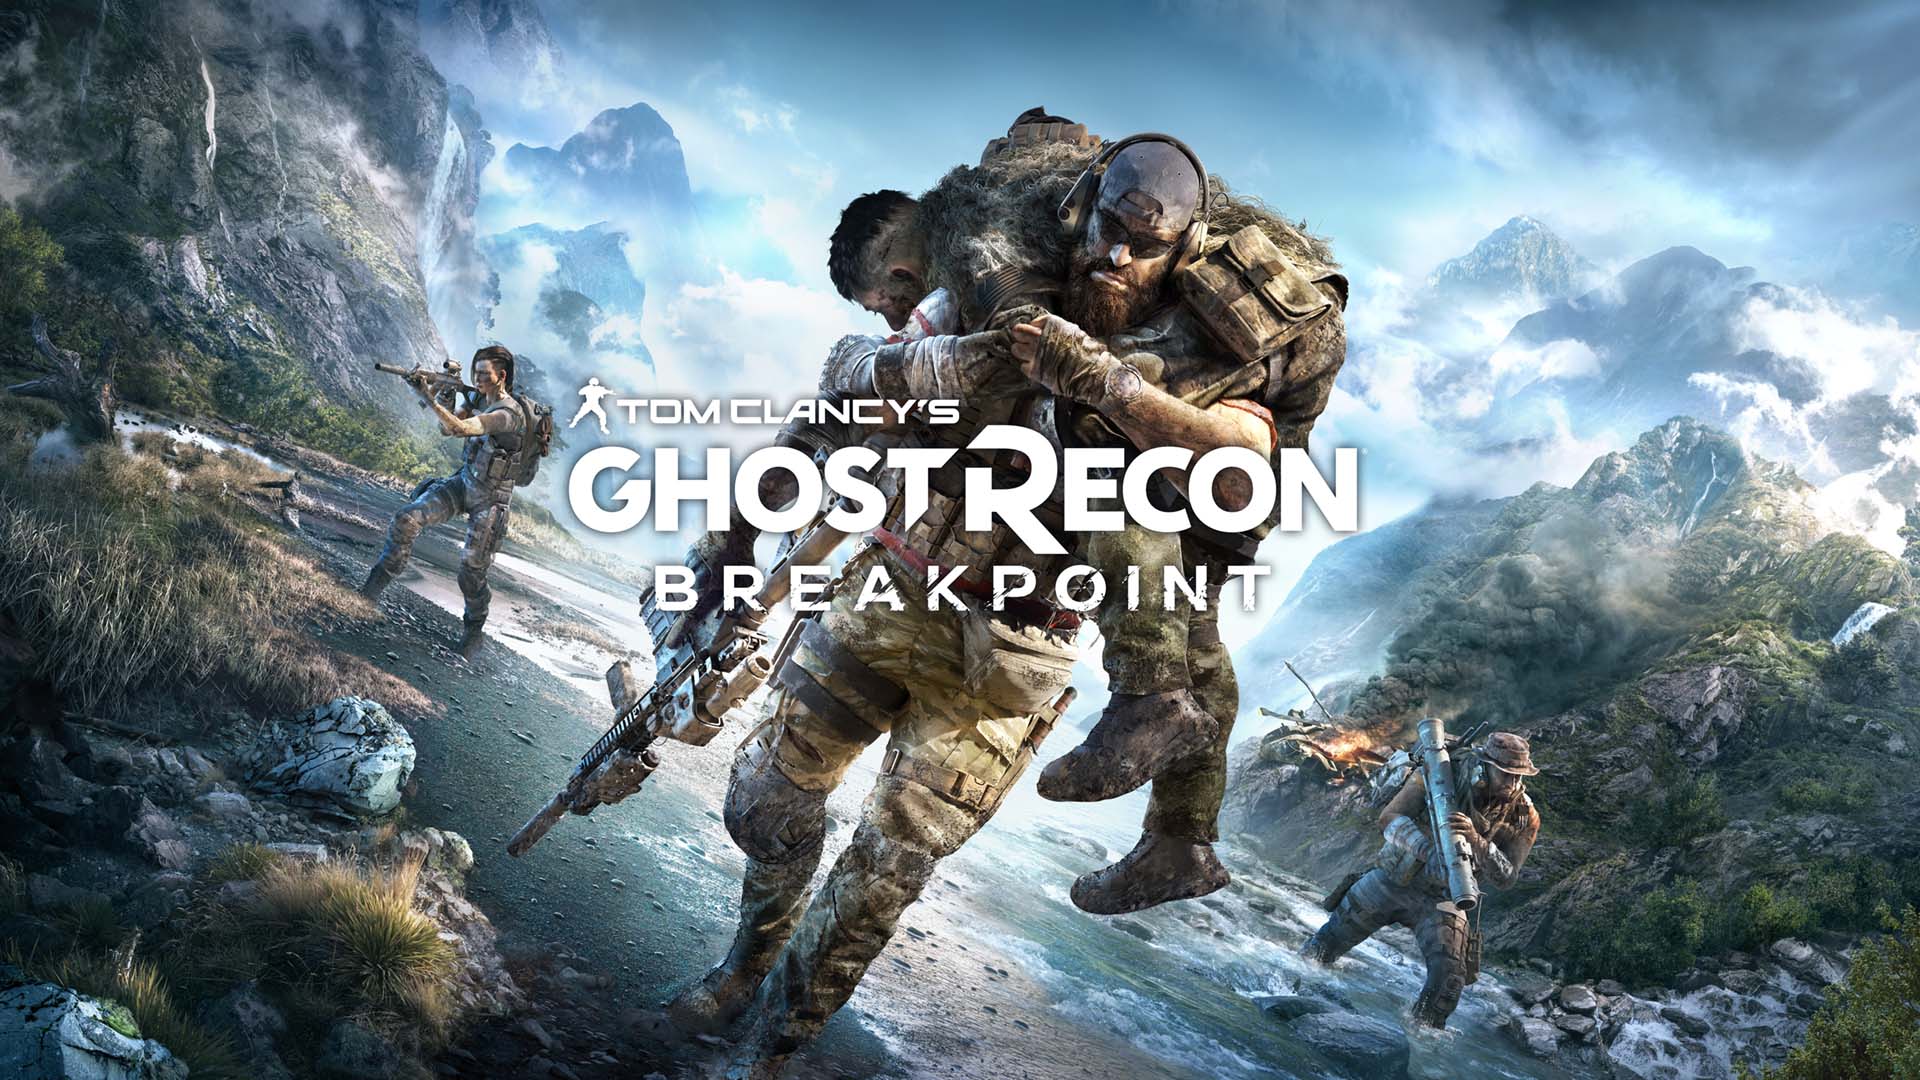 Ghost Recon Breakpoint Announced for PC, PS4, and Xbox One